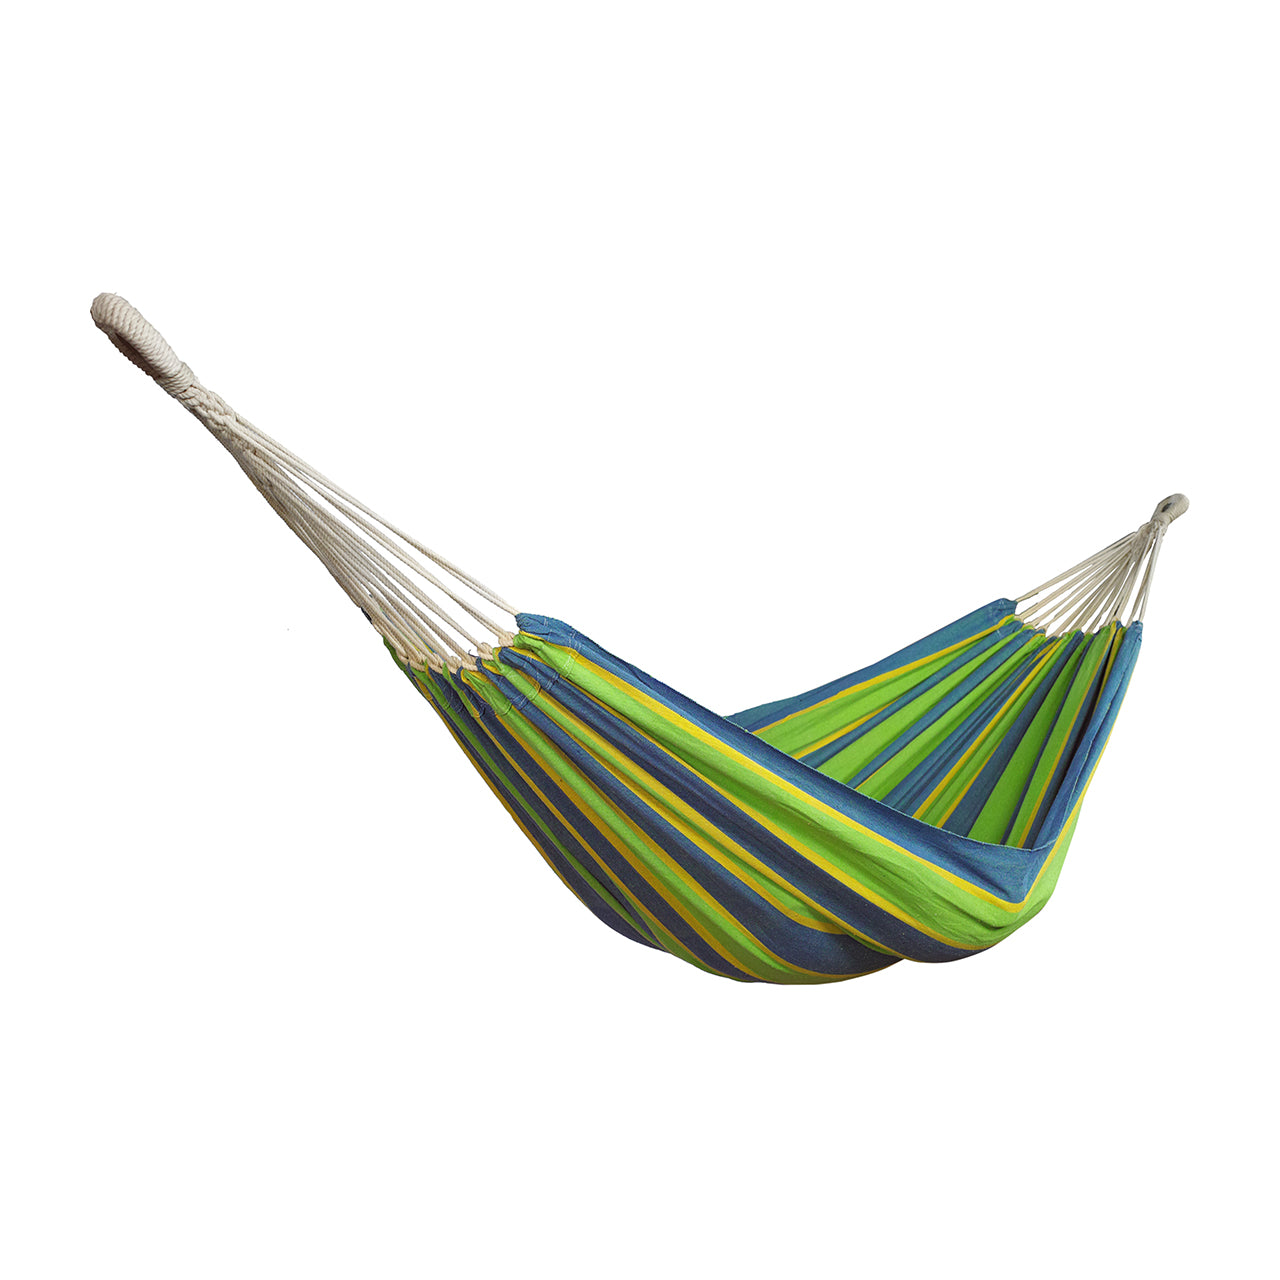 Bliss Hammocks 60-inch Wide Double Hammock in a Bag with Hand-woven Rope loops in the Mediterranean Stripe variation.